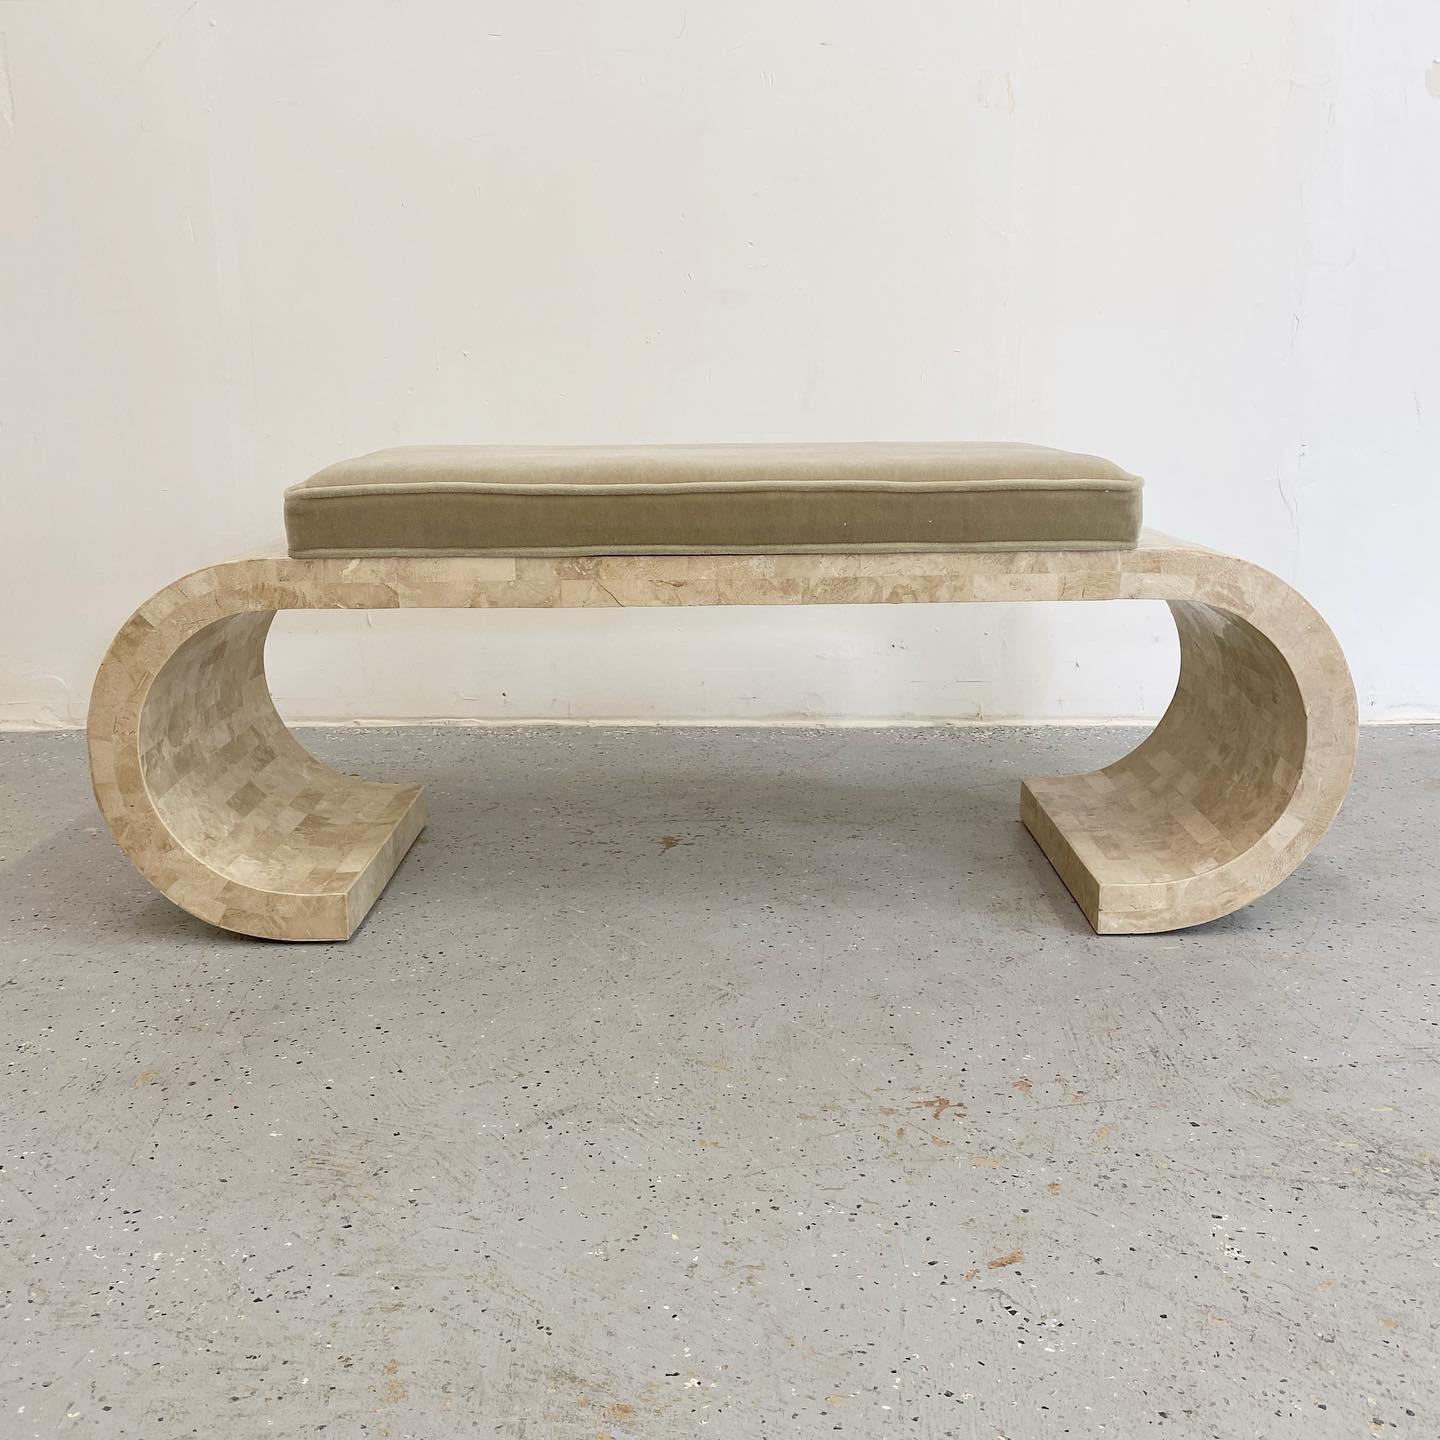 An outstanding Karl Springer style scroll bench encased in tessellated stone with mohair upholstery to the cushioned seat. Wonderful natural tones and organic shape to this Hollywood Regency bench, newly upholstered.